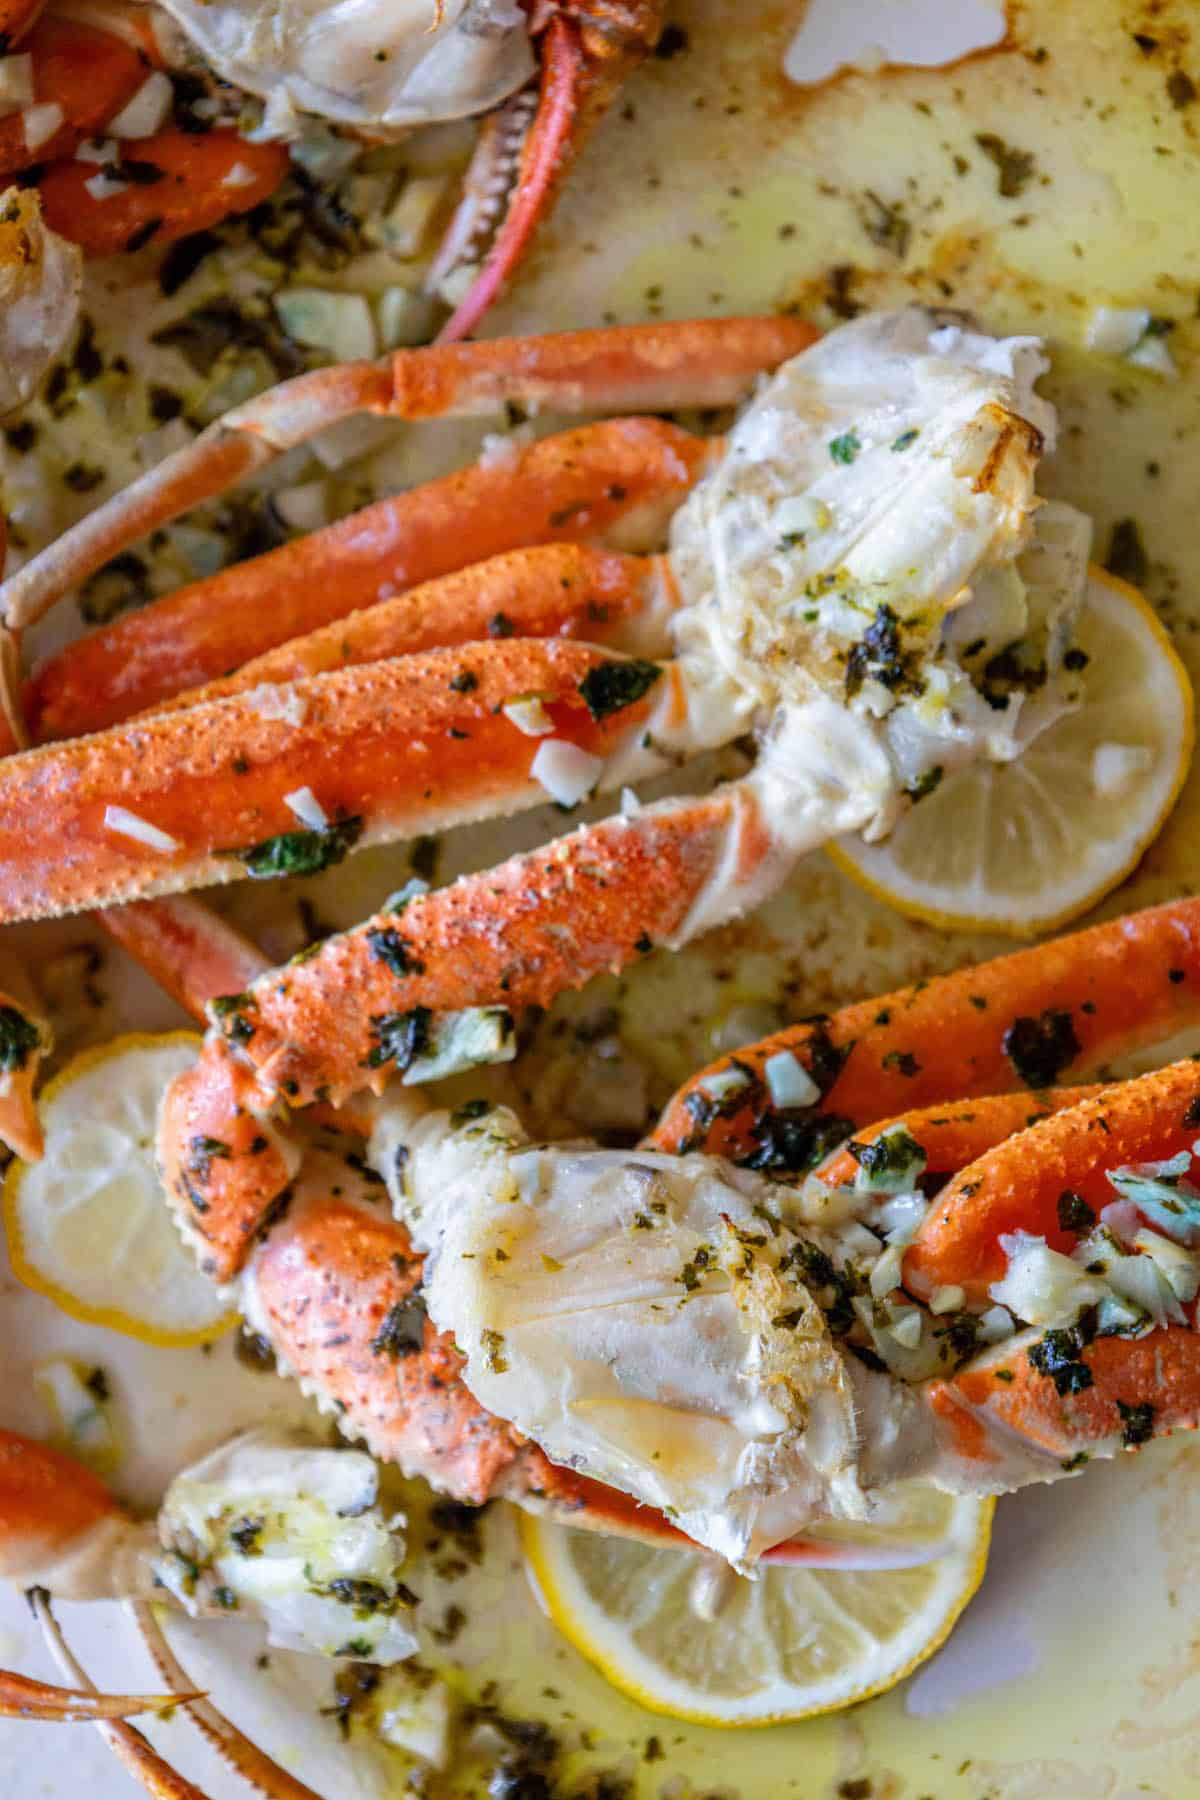 Baked crab legs with lemon wedges.